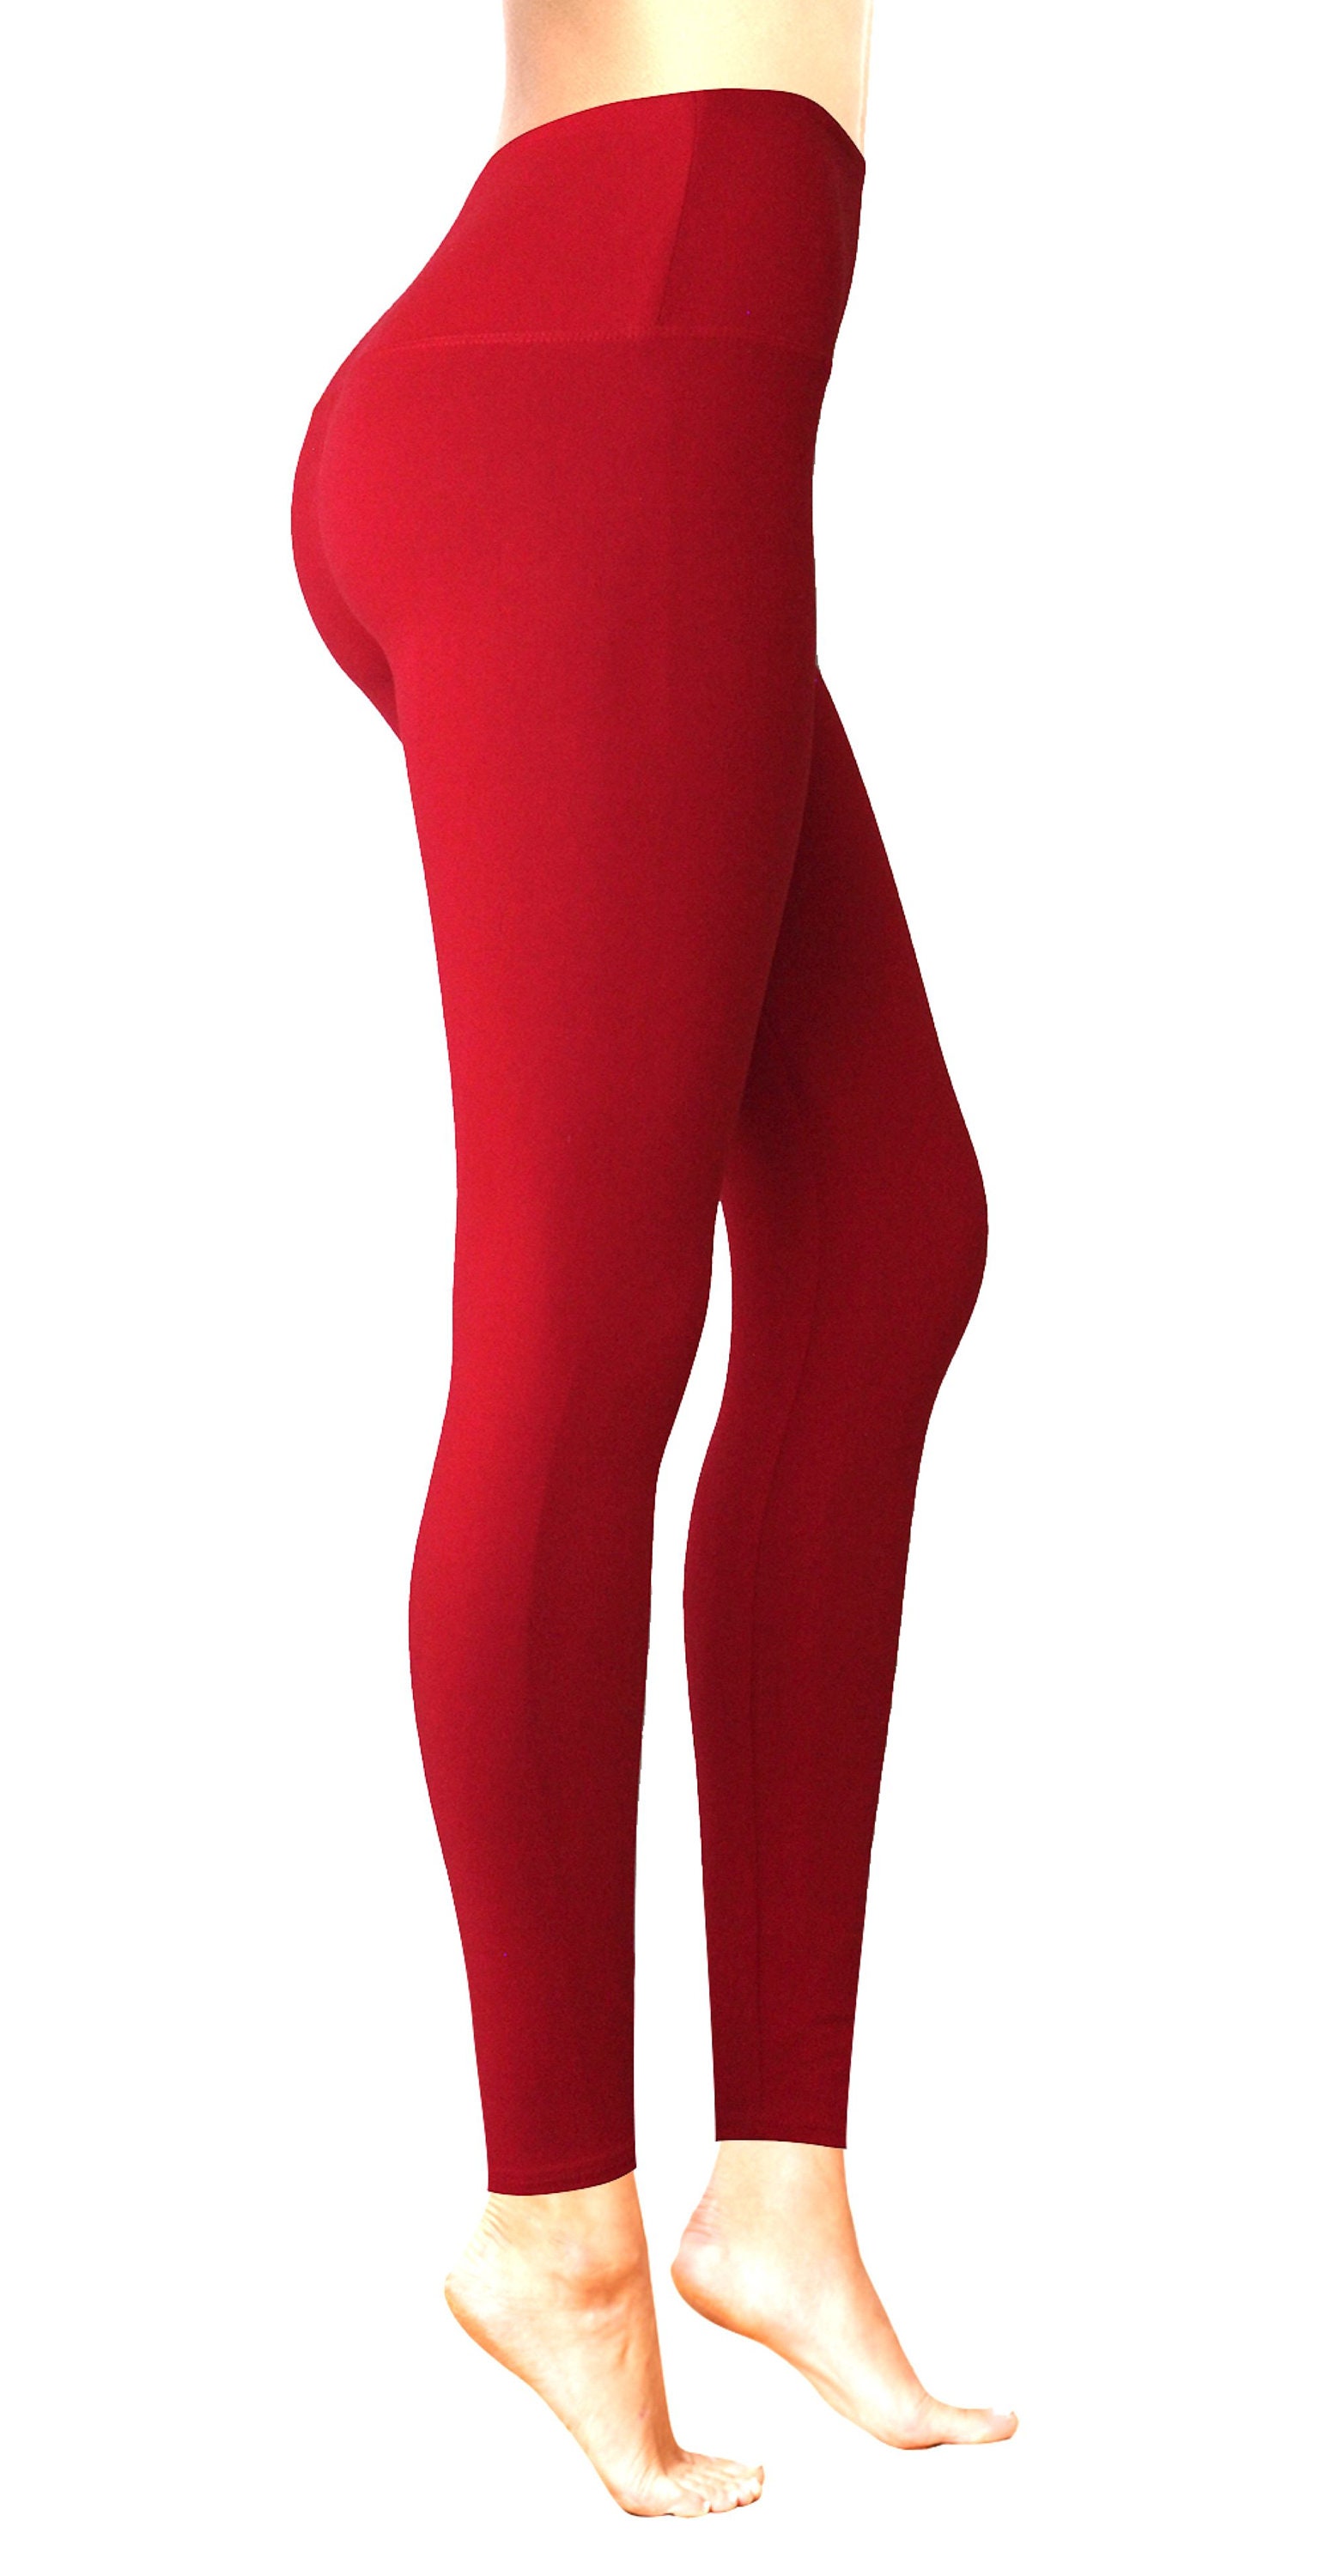 Buy Leggings for Women, Yoga Pants, 5 High Waist Leggings, Solid Colors,  Buttery Soft, One Size Leggings, Plus Size Leggings, Workout Leggings  Online in India 